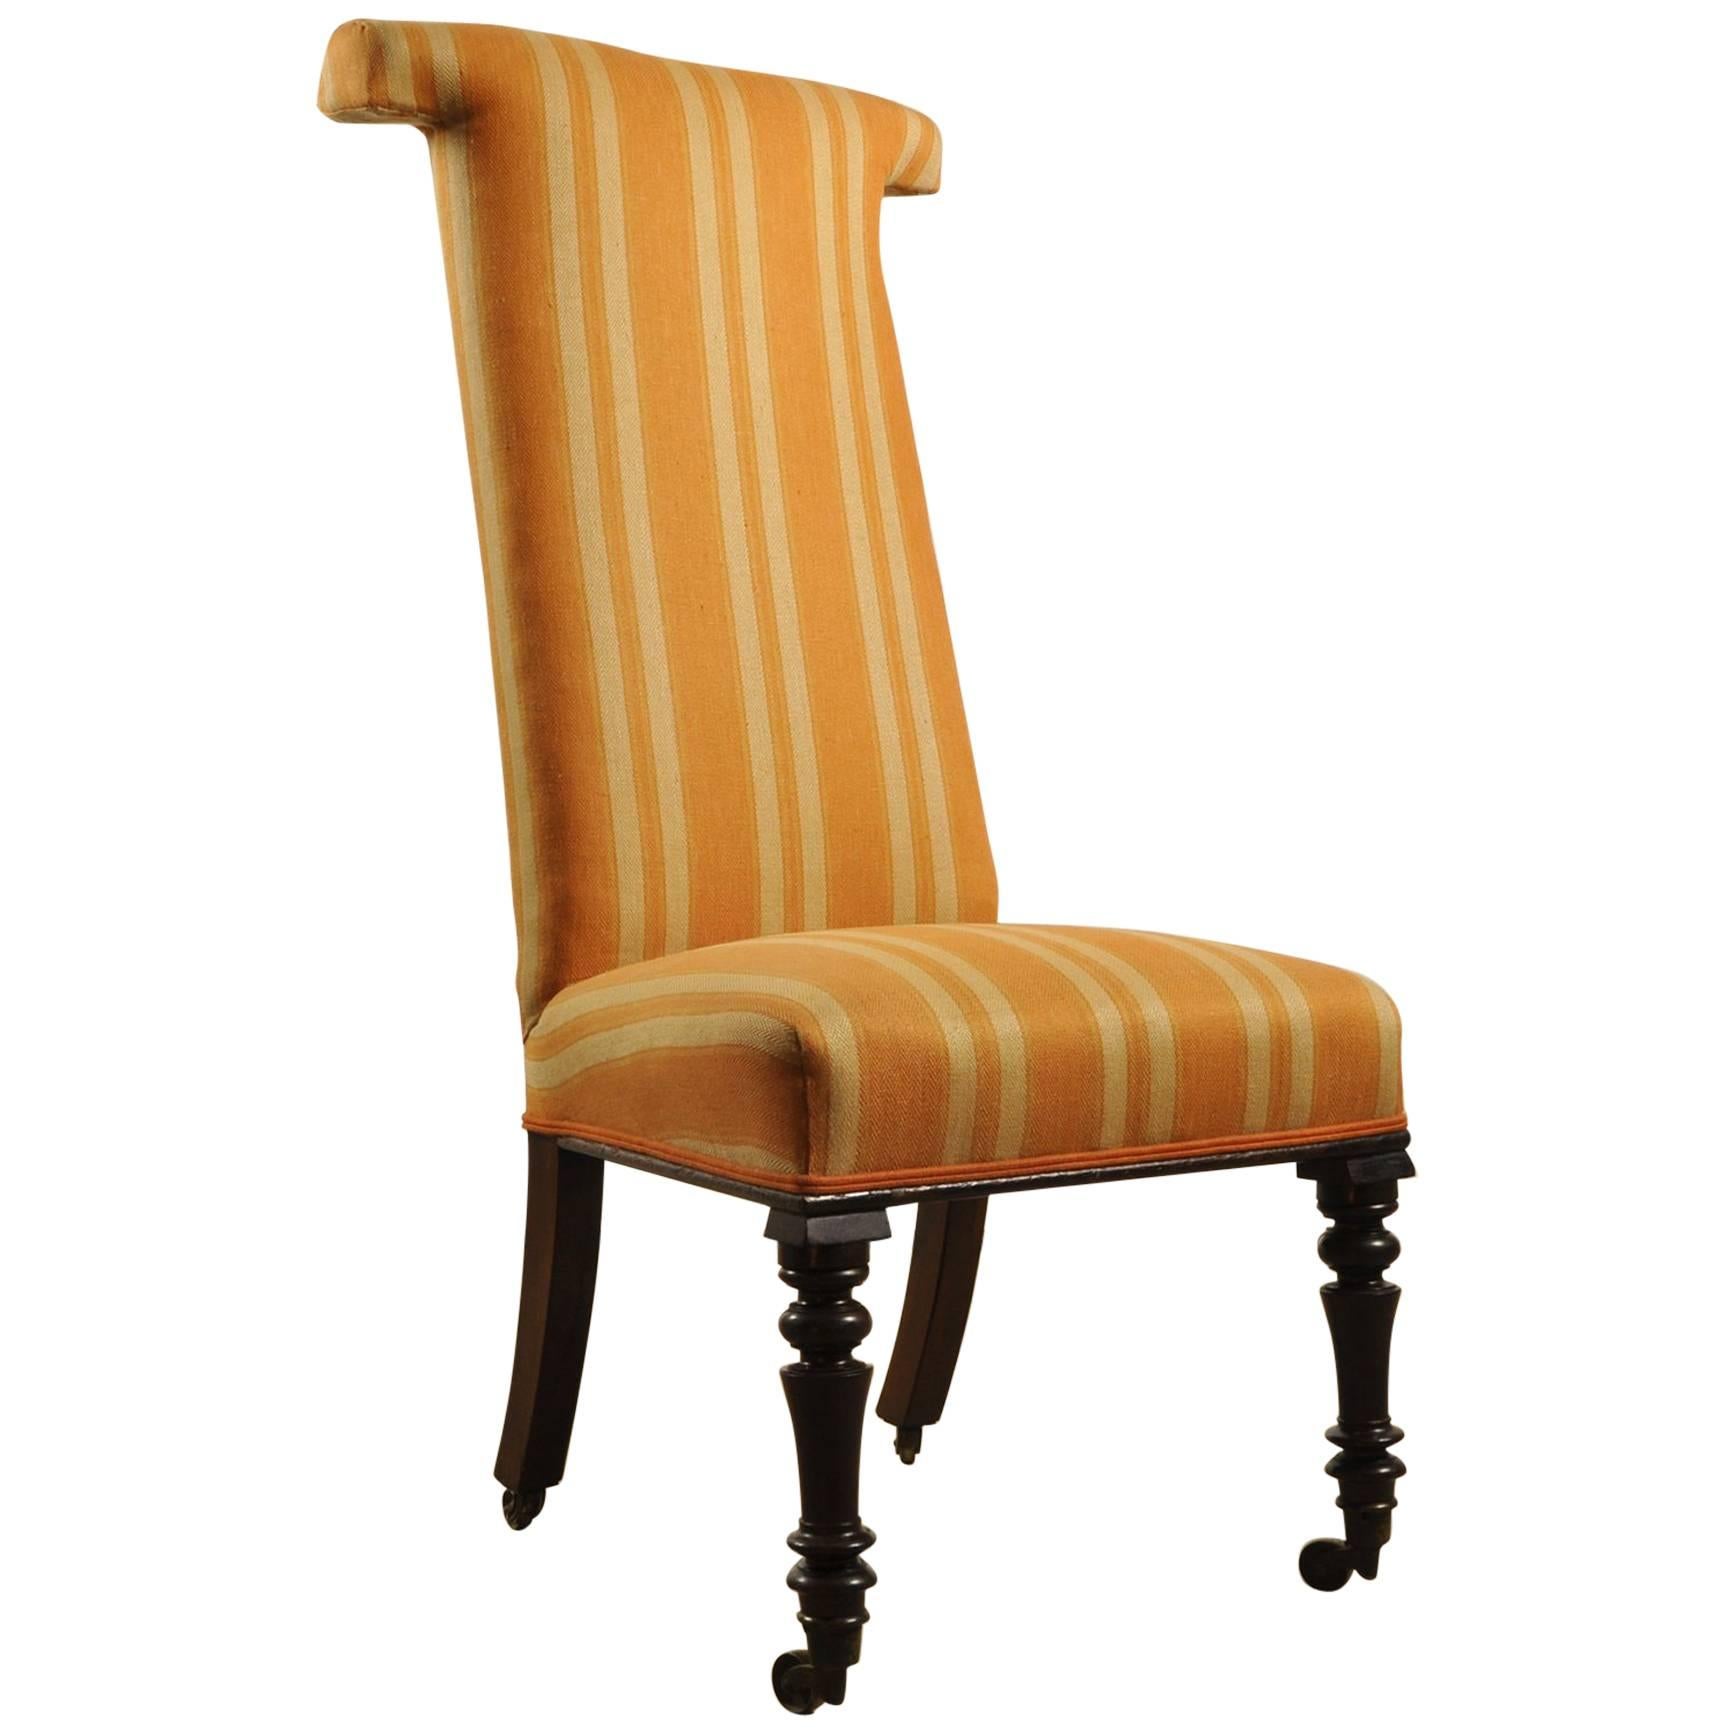 Victorian Prayer Chair For Sale